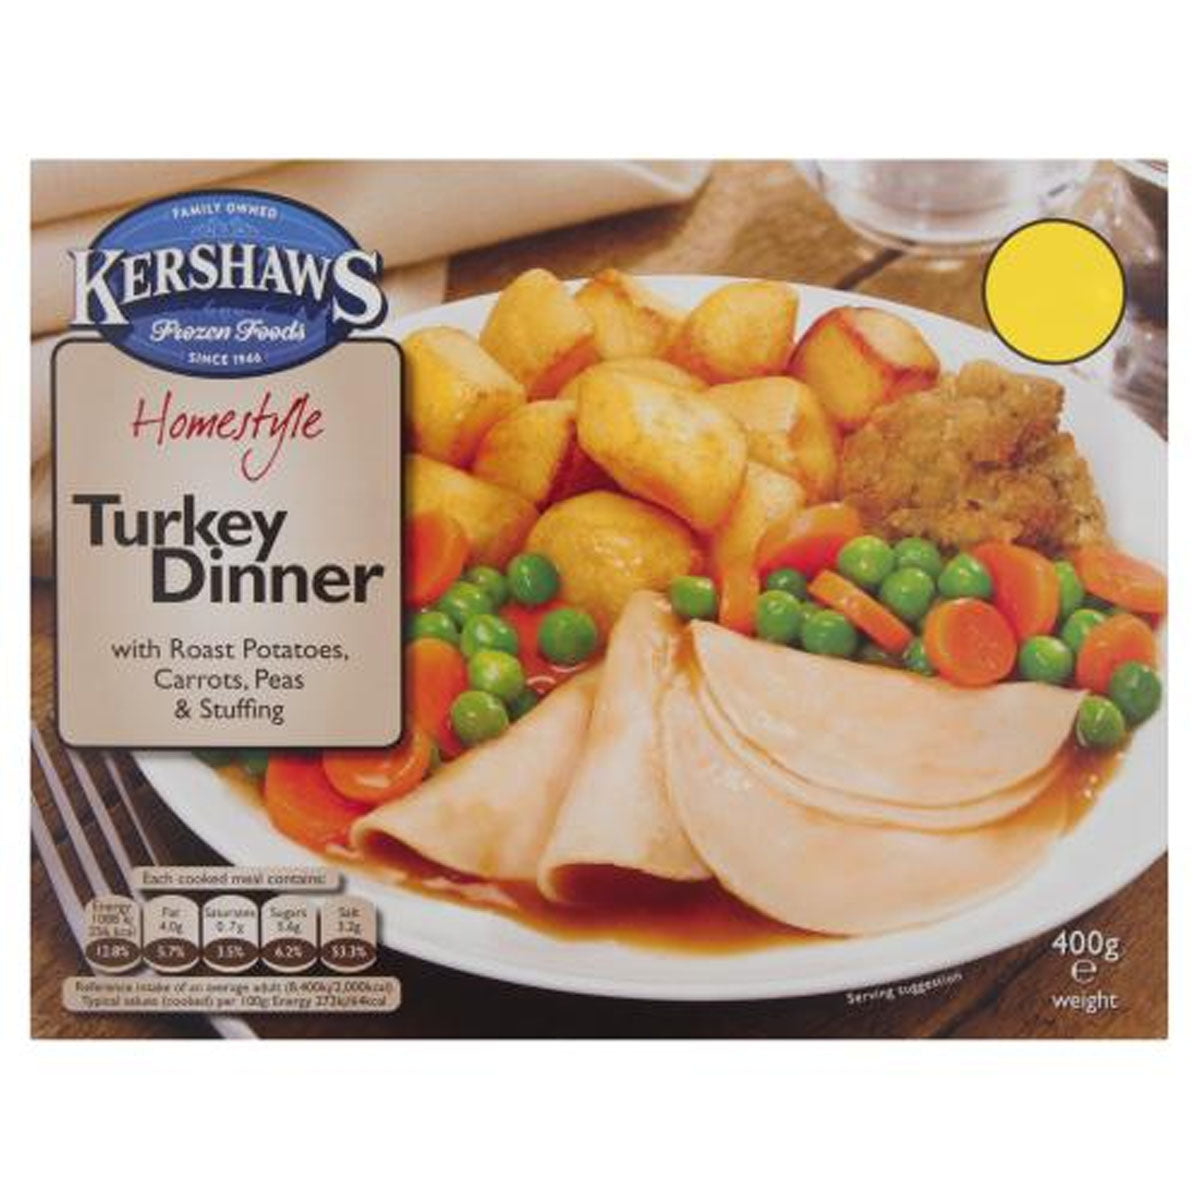 Kershaw's - Homestyle Turkey Dinner with Roast Potatoes, Carrots, Peas & Stuffing - 400g.